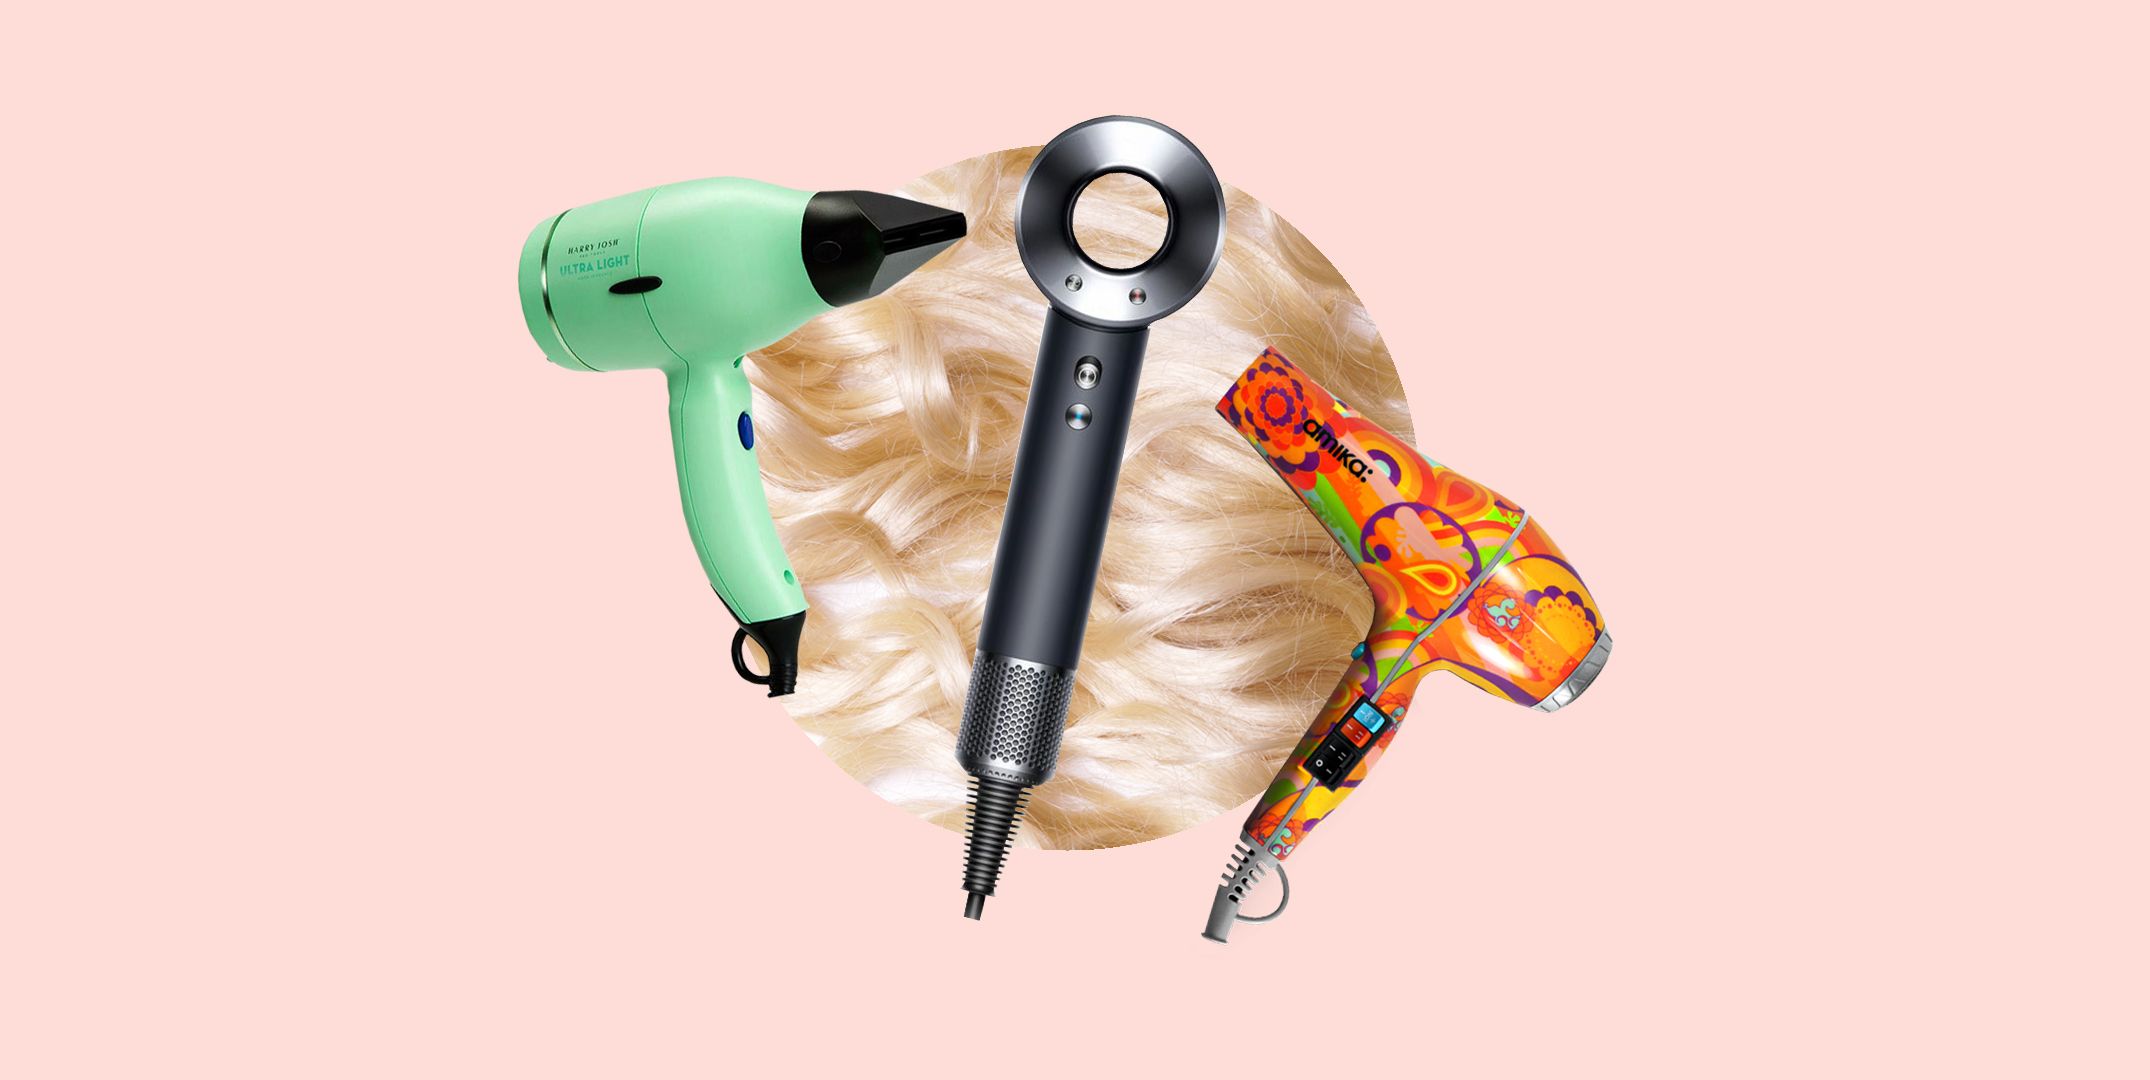 finish the puzzle of the big hair dryer in panfu